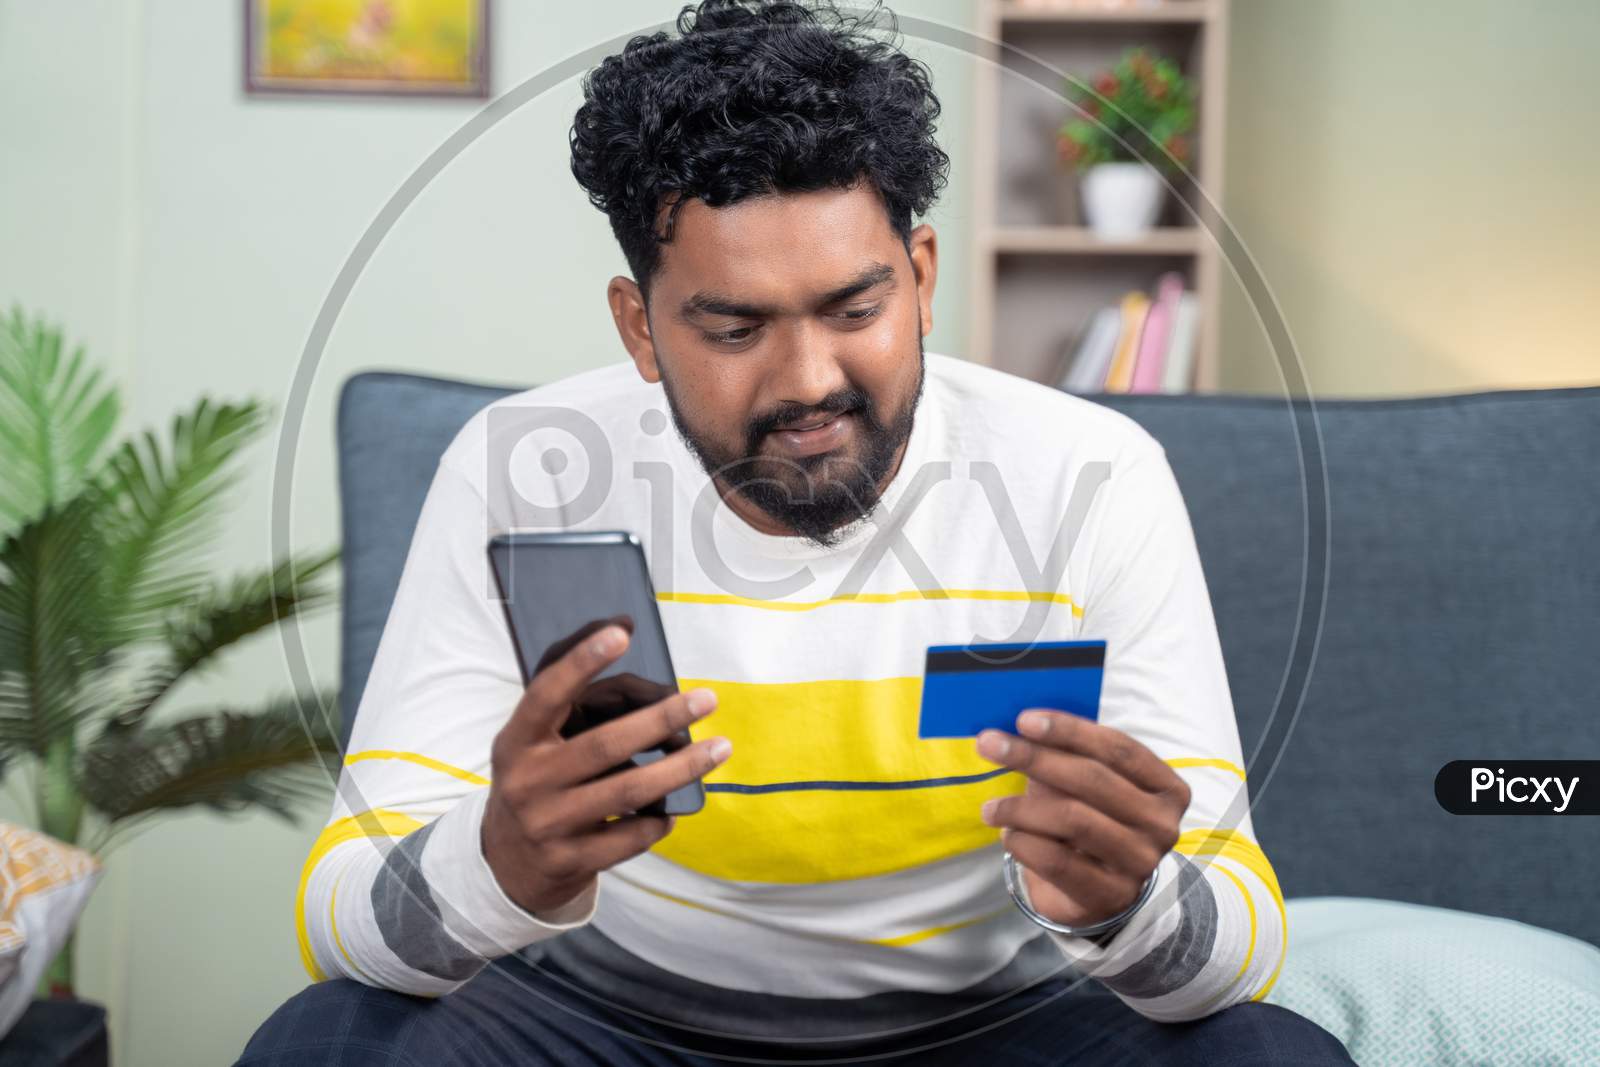 Young Man Entering Card Details On Mobile Phone For Online Purchase - Concept Of Digital Payment For Shopping, Internet Banking.